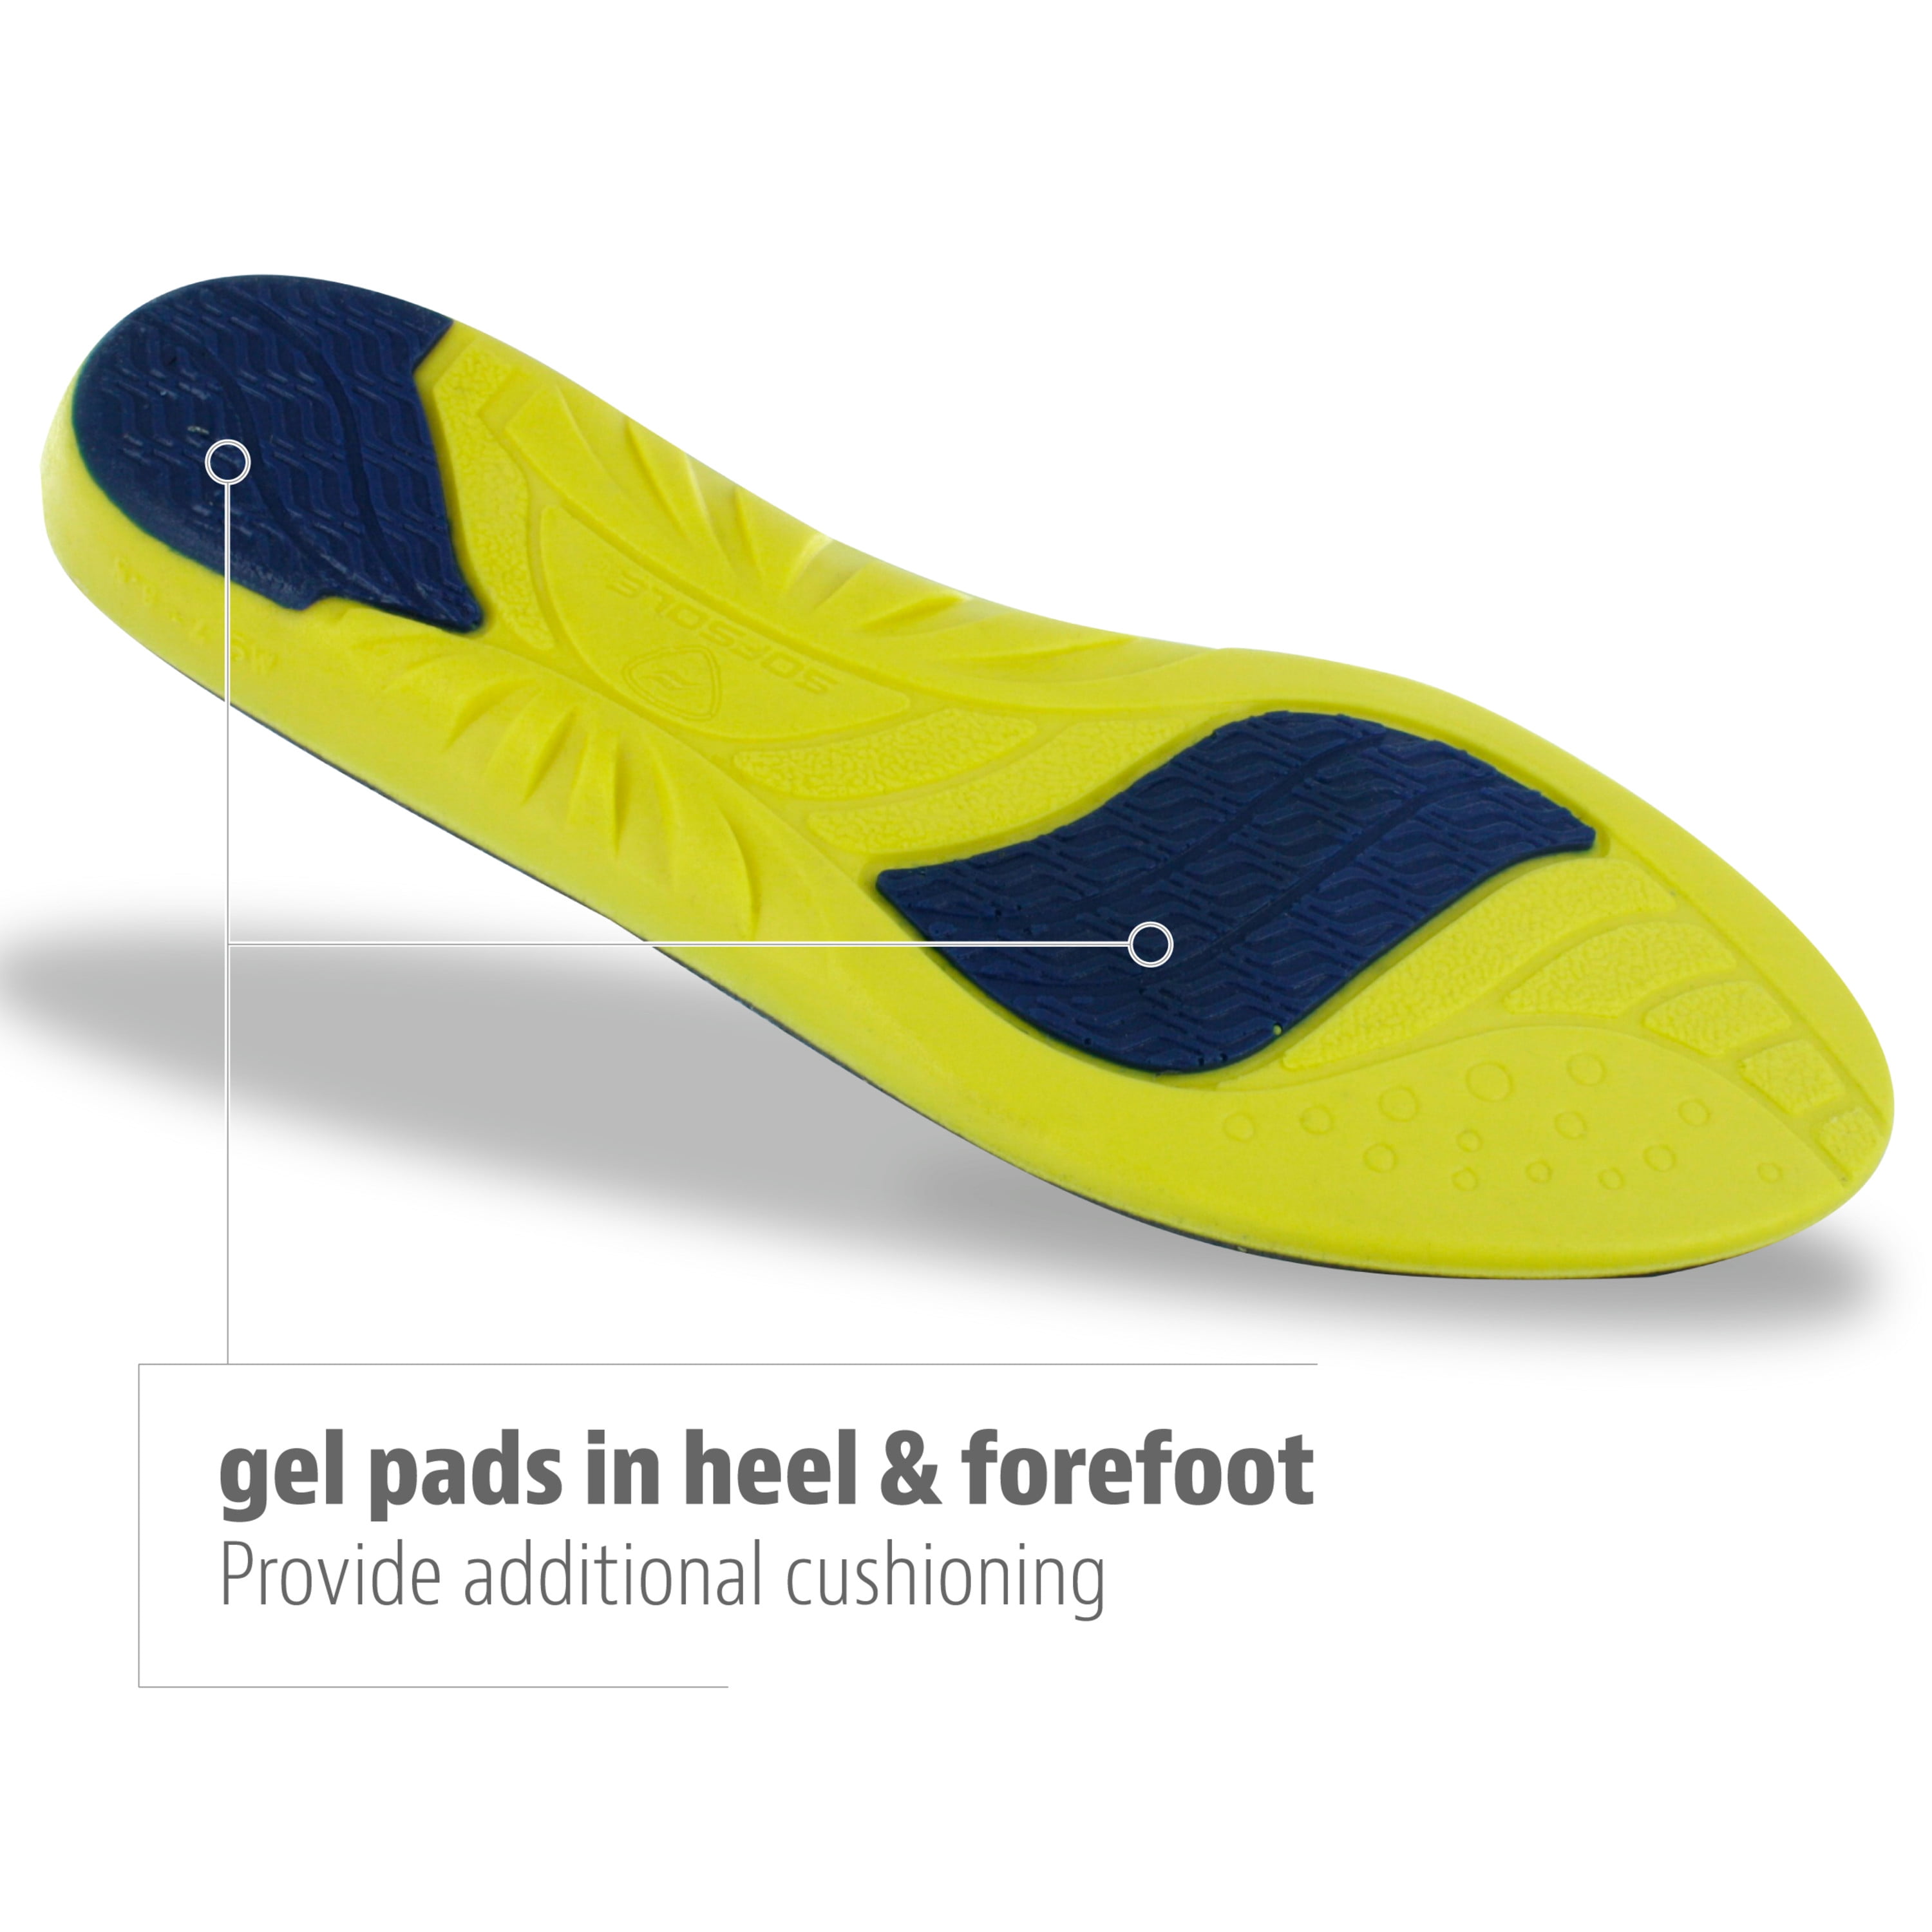 sof sole perform athlete insole